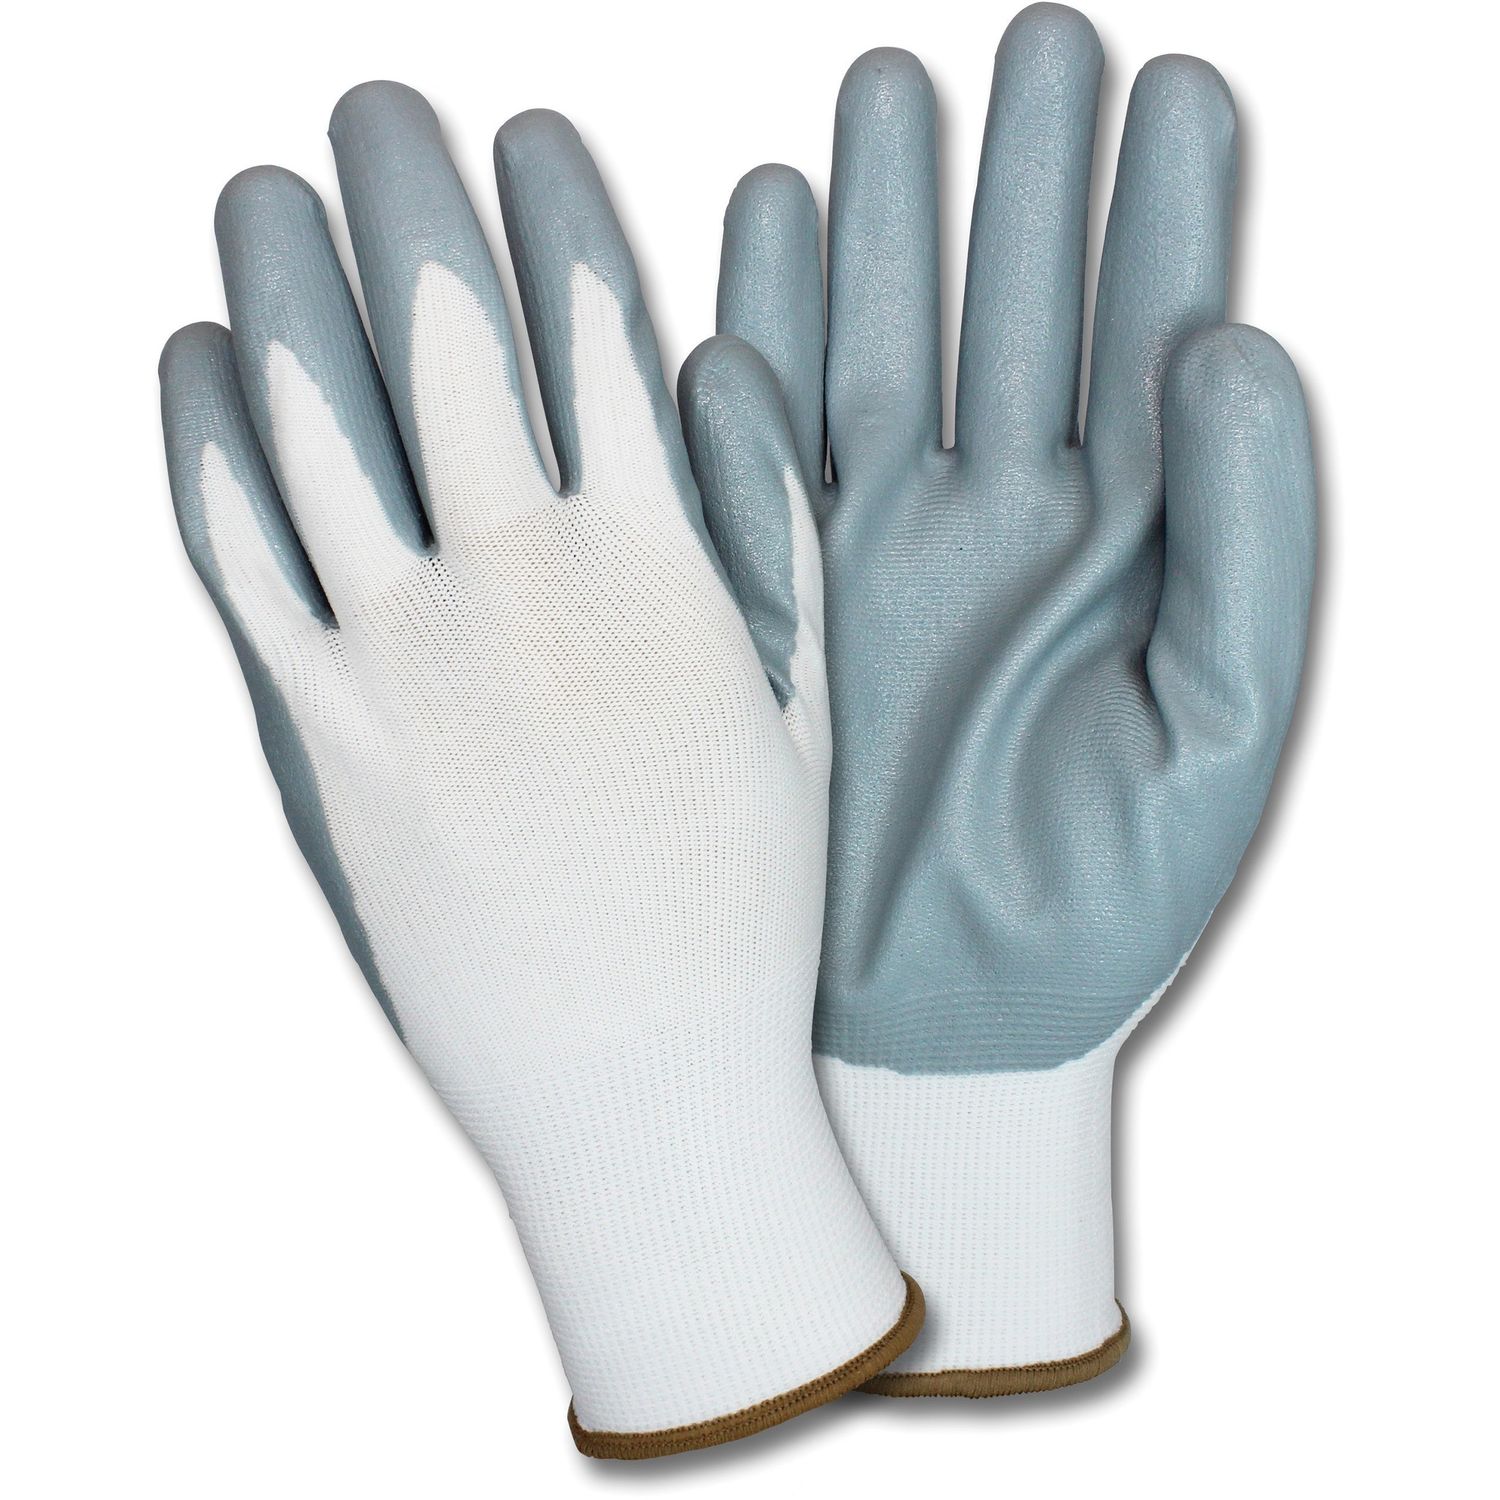 Nitrile Coated Knit Gloves Hand Protection, Nitrile Coating, Small Size, Gray, White, Durable, Finger Protection, Flexible, Breathable, Knitted, Comfortable, For Industrial, 72 / Carton